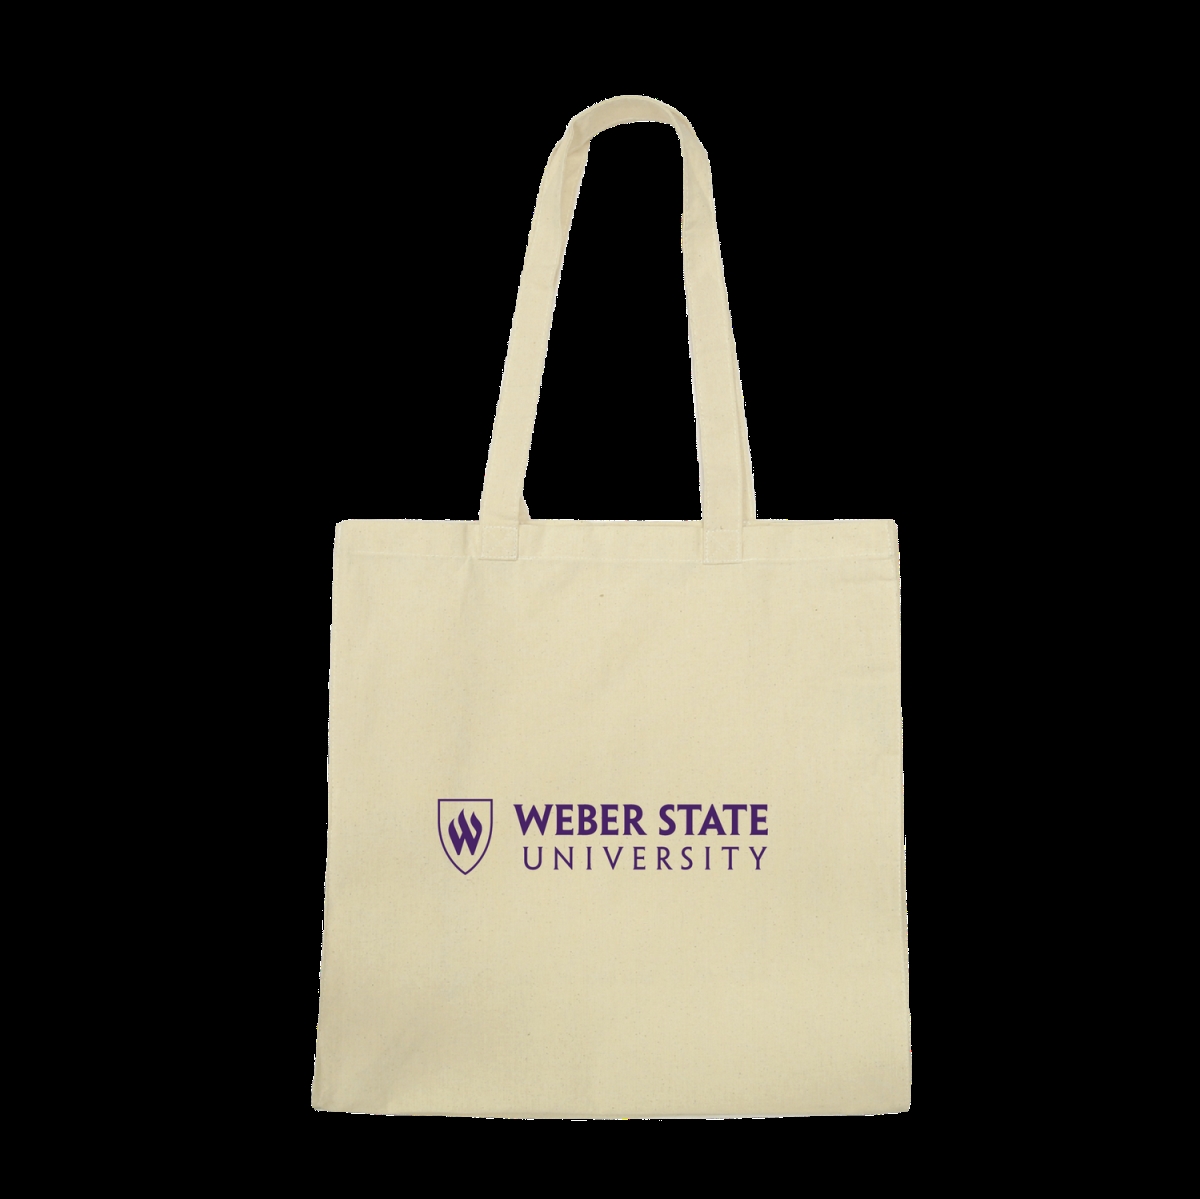 1101-251-NAT Weber State University Wildcats Institutional Tote Bag, Natural - One Size -  W Republic